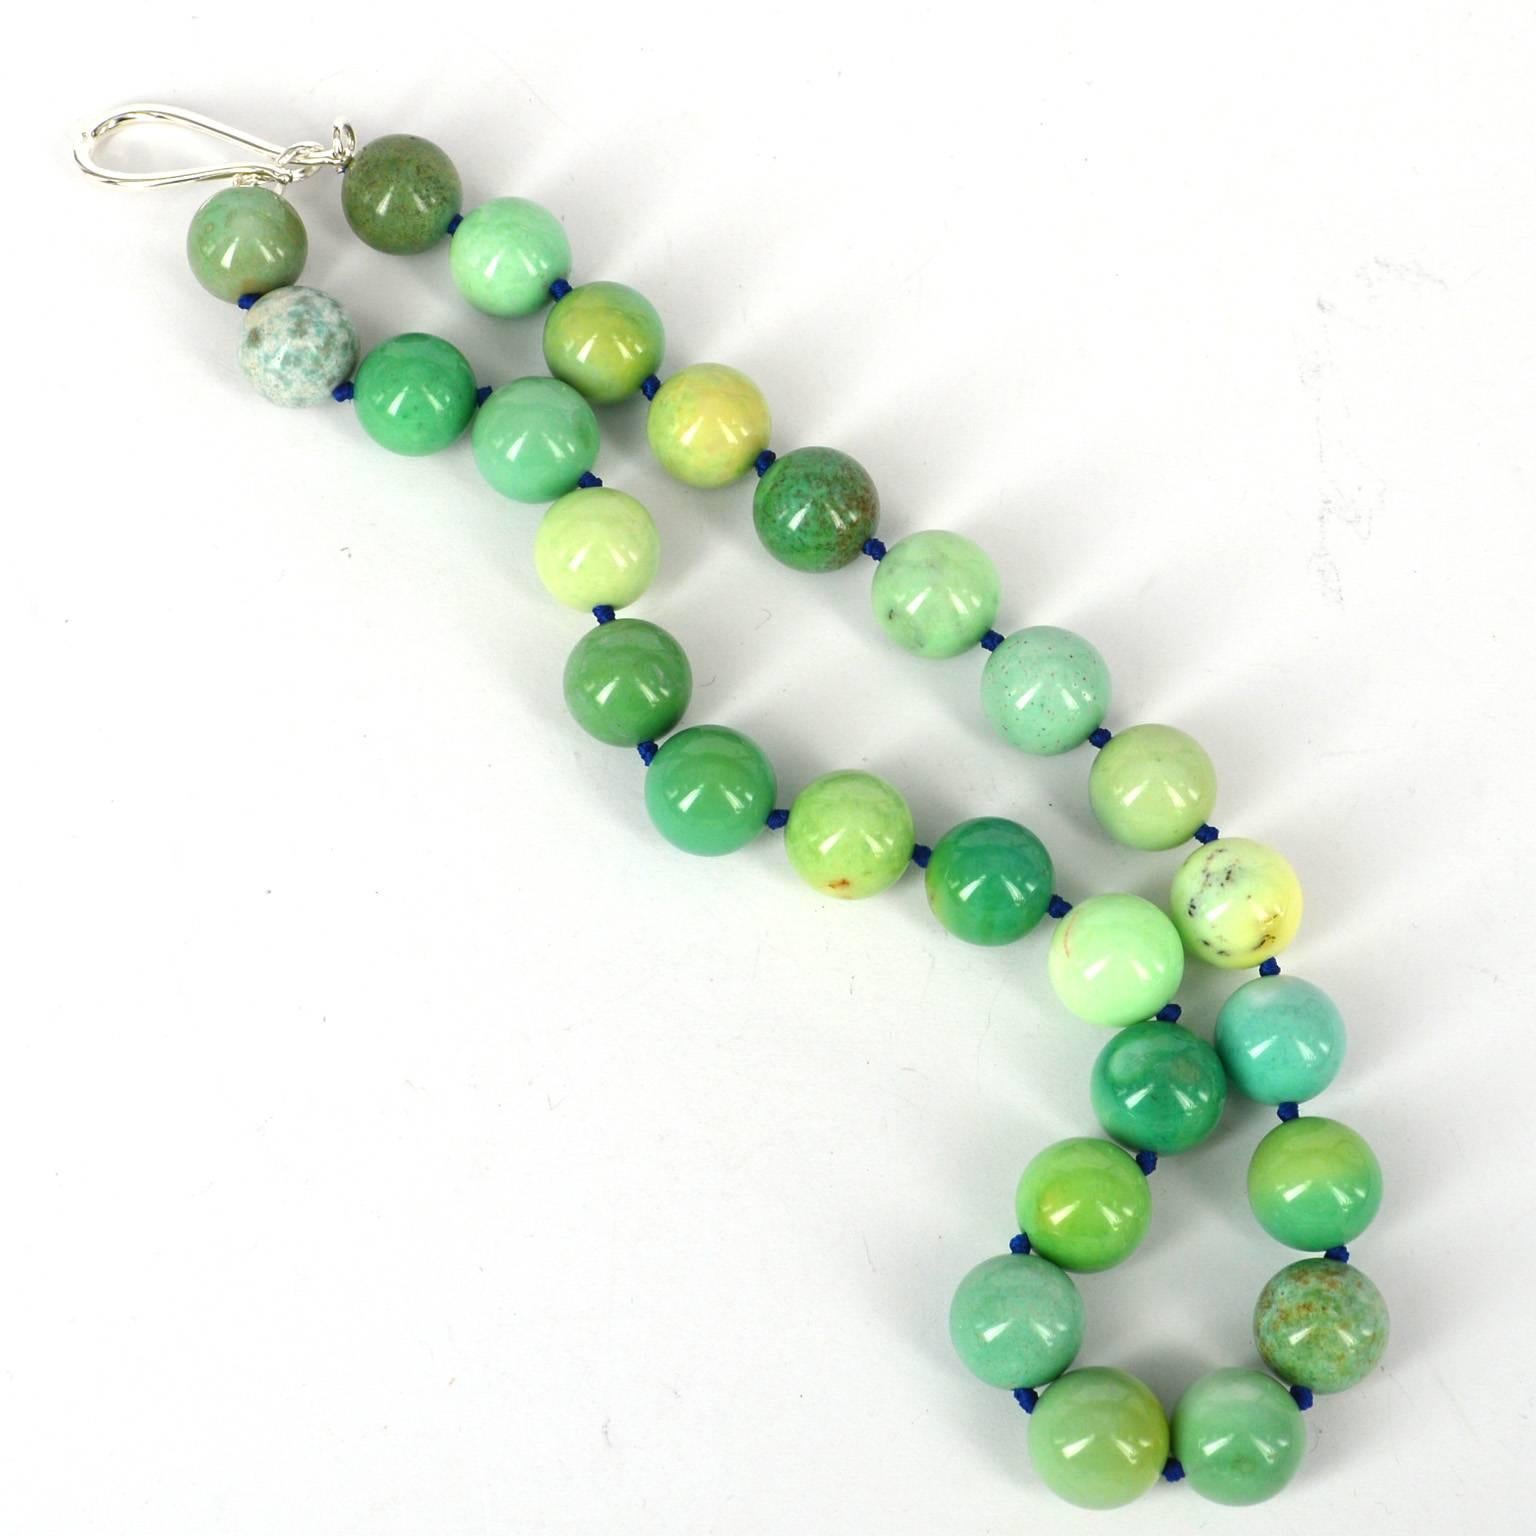 Stunning natural tones in this Green Grass Agate necklace, stones measure 16mm each and are hand knotted on blue thread for strength and durability, with a 35mm Sterling Silver hook clasp.
total necklace length is 54cm.
custom alteration available,